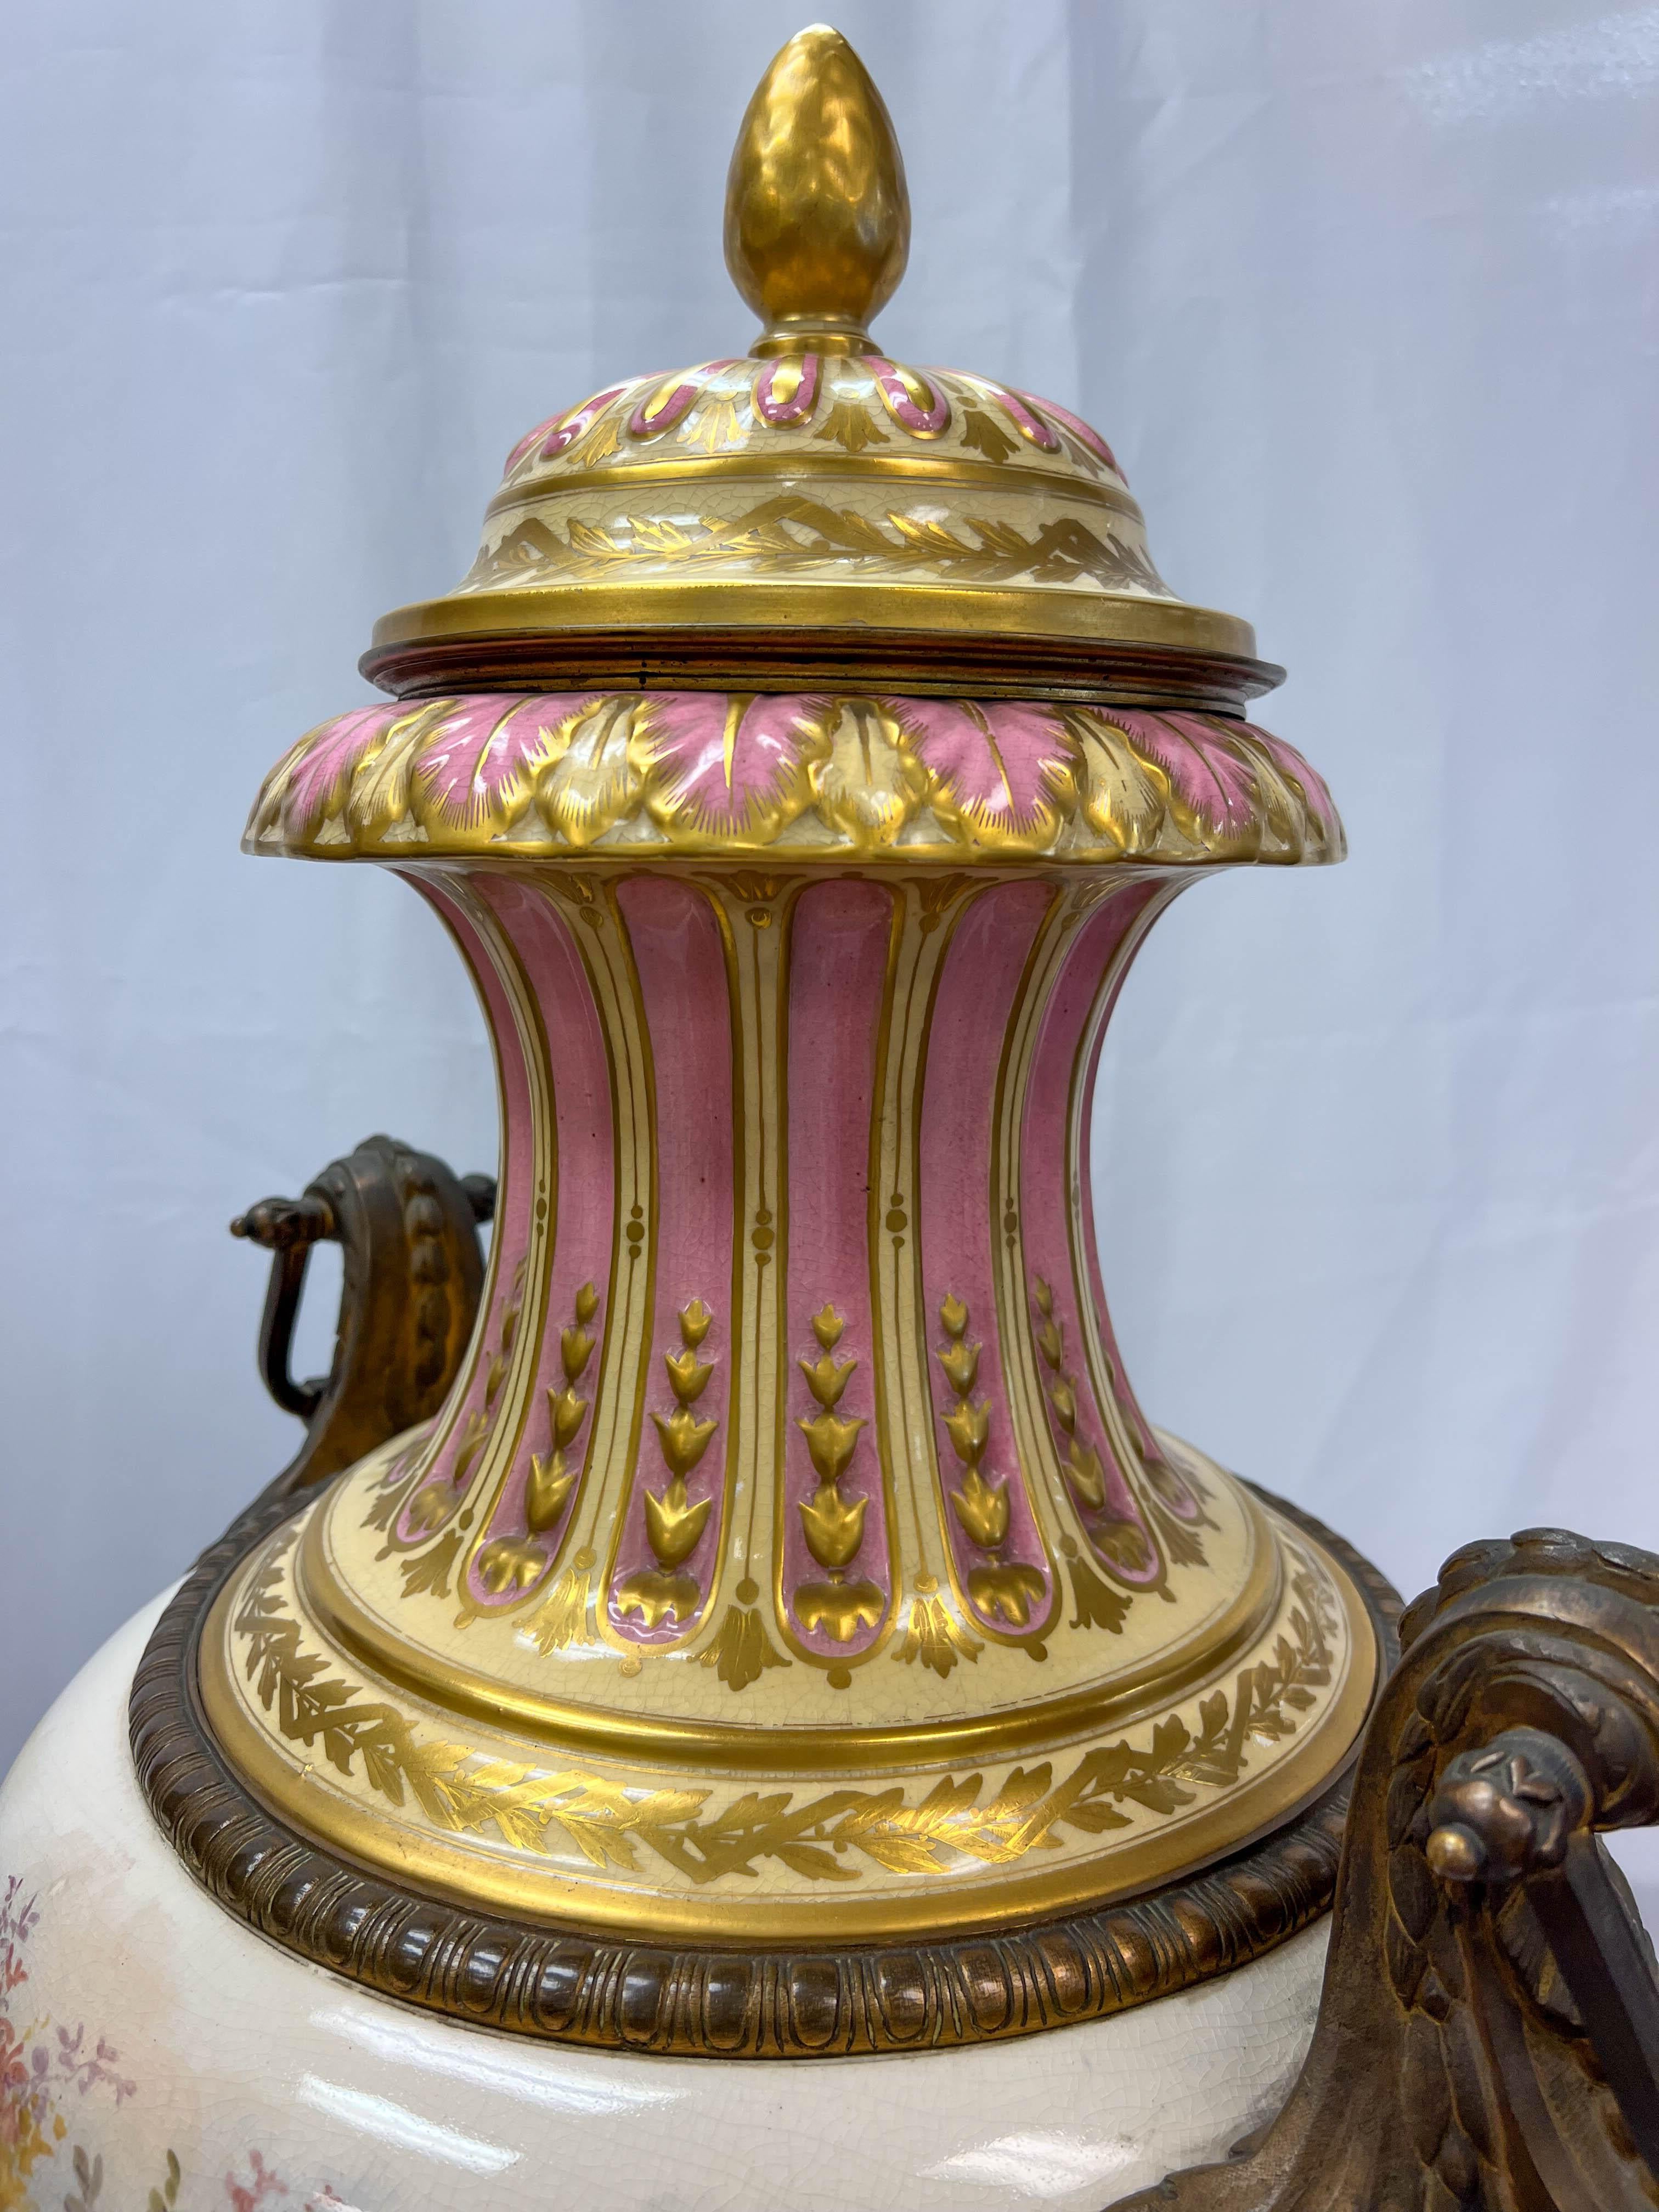 19th Century Large Scale Neoclassical Ormolu Sèvres Urn For Sale 1